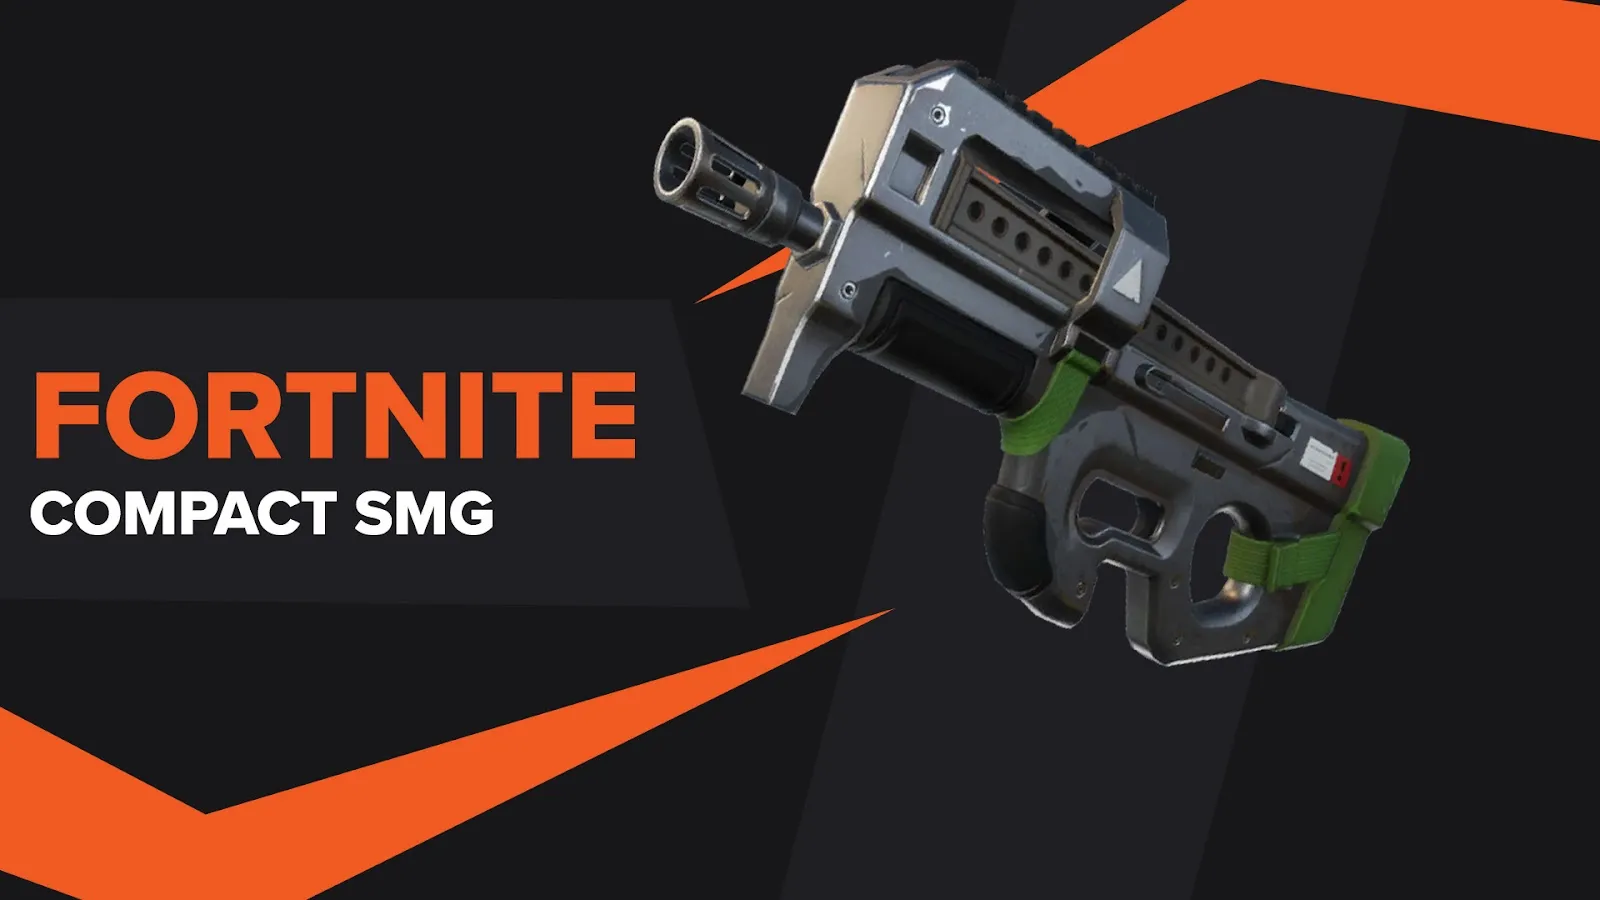 Compact SMG Fortnite Weapon